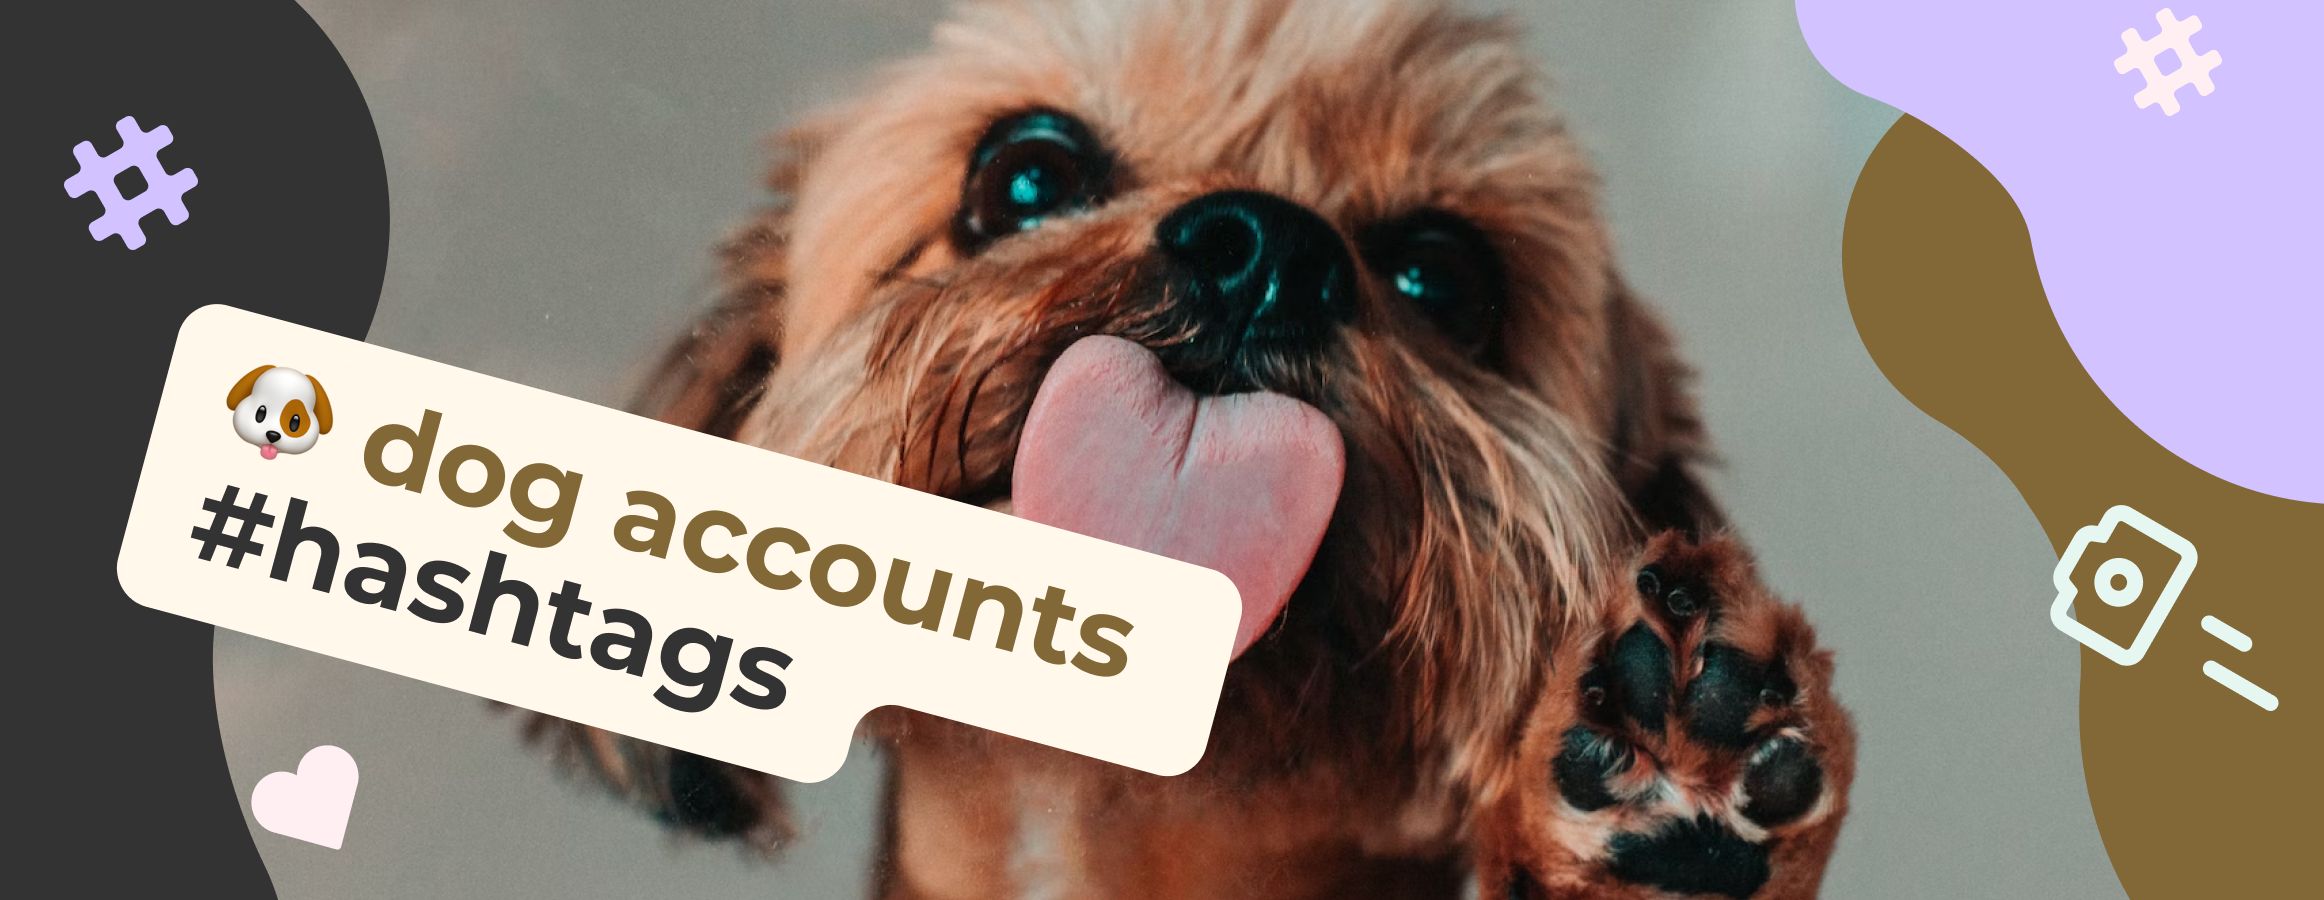 Dog hashtags for Instagram likes - best Ig tags for dog accounts